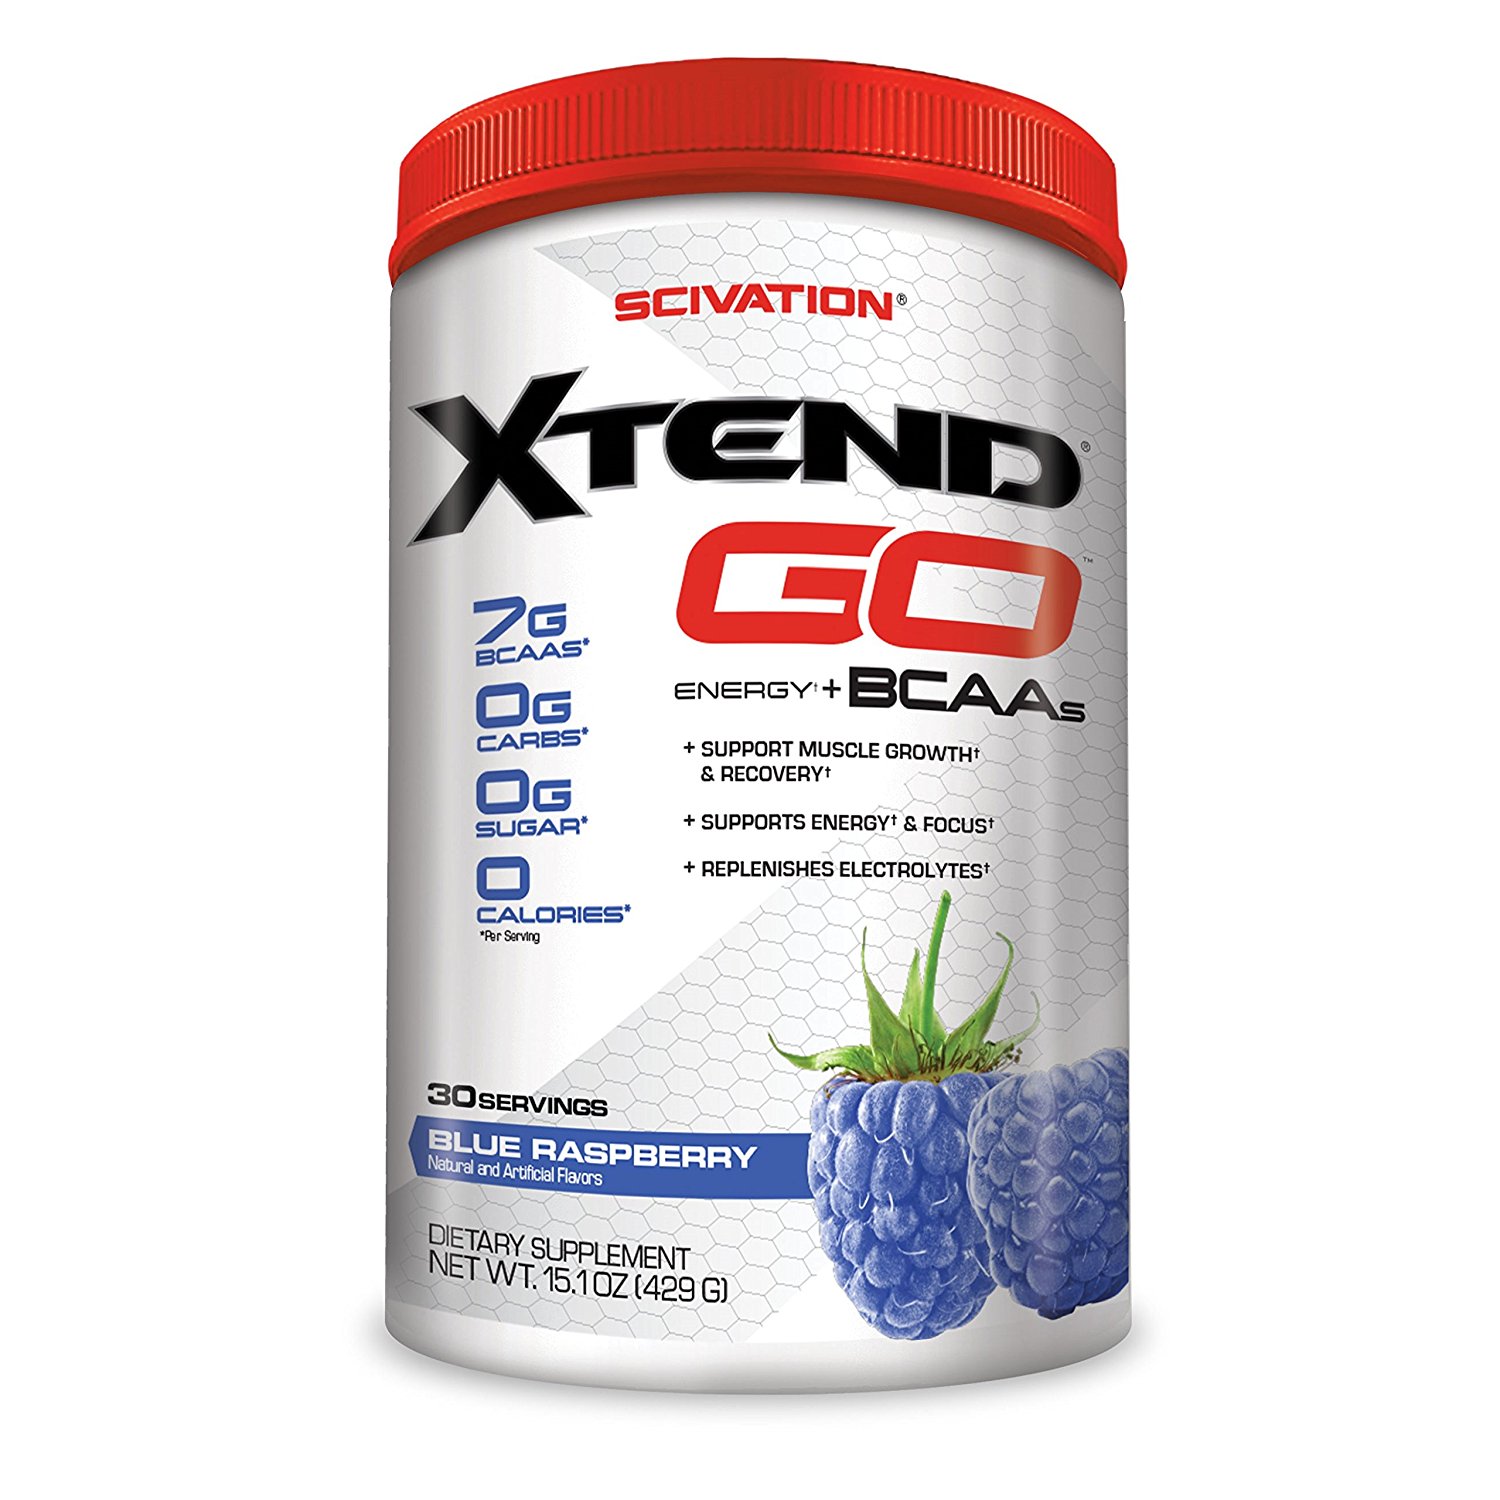 15 Minute Xtend go pre workout for Women